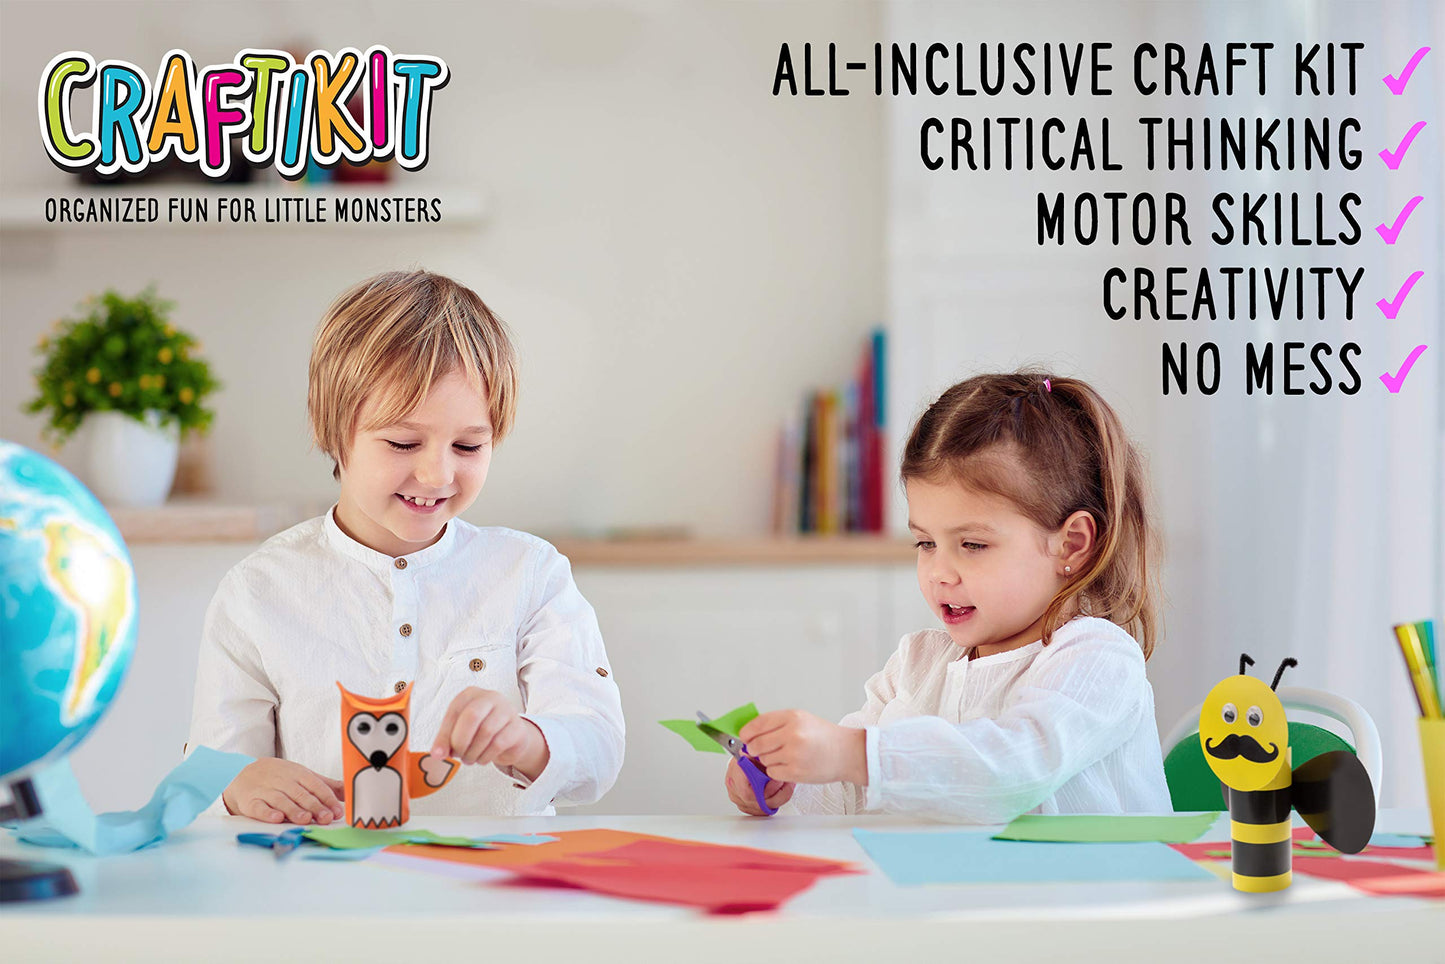 Craftikit ® 20 Award-Winning Toddler Arts and Crafts for Kids Ages 4-8 Years, All-Inclusive Animal Craft Kits, Fun Toddler Crafts Box for Girls,